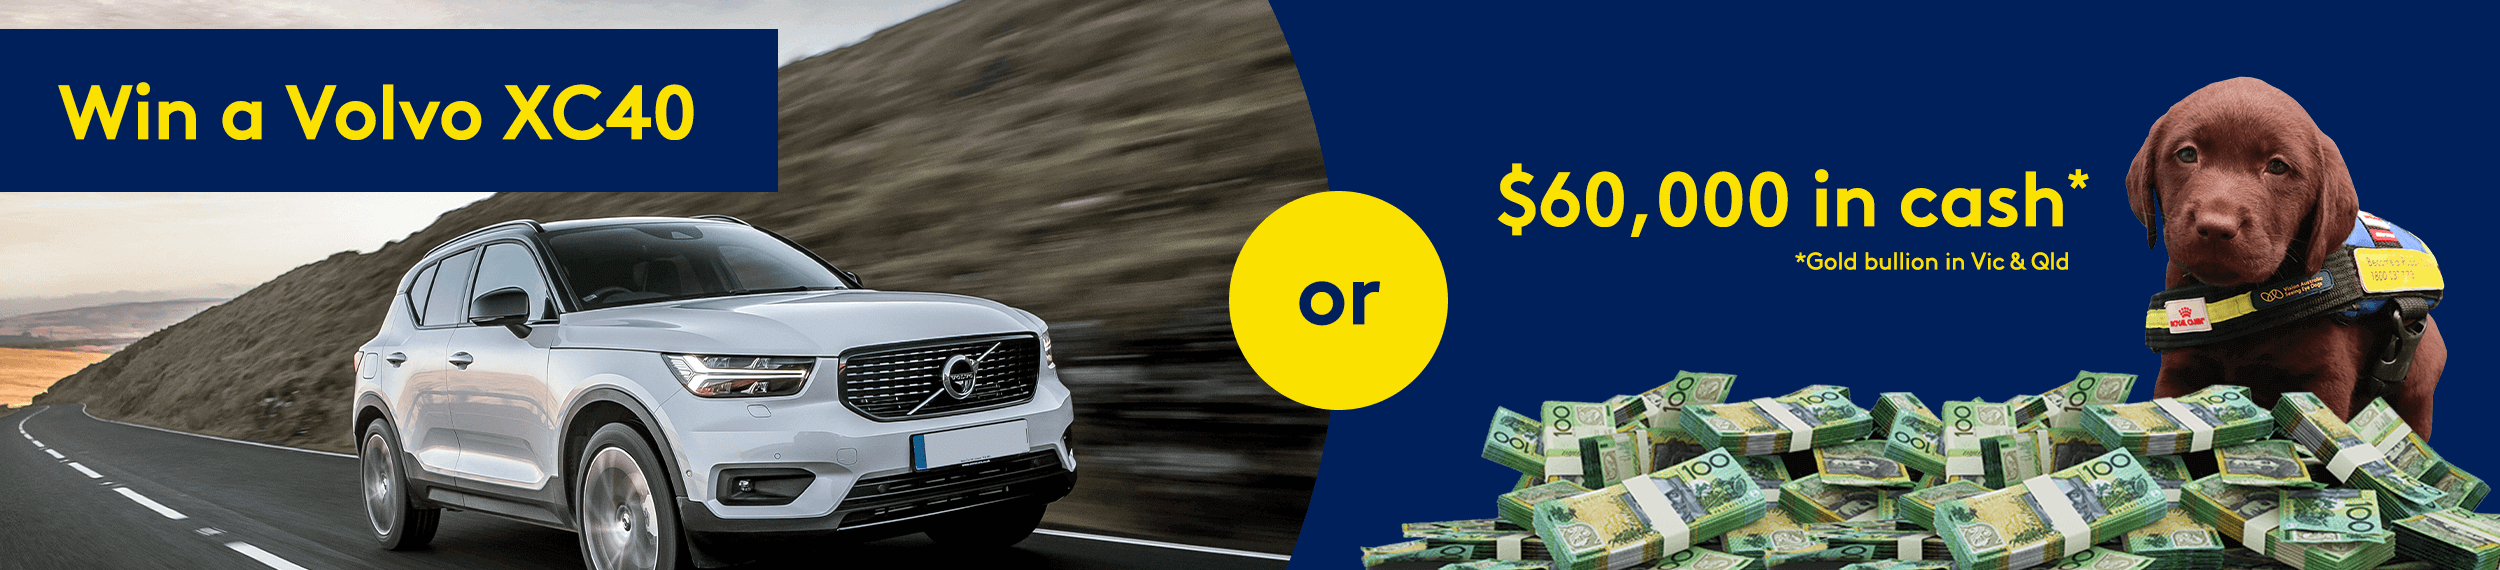 Win a Volvo XC40 or $60,000 in cash! *Gold bullion in Vic & Qld